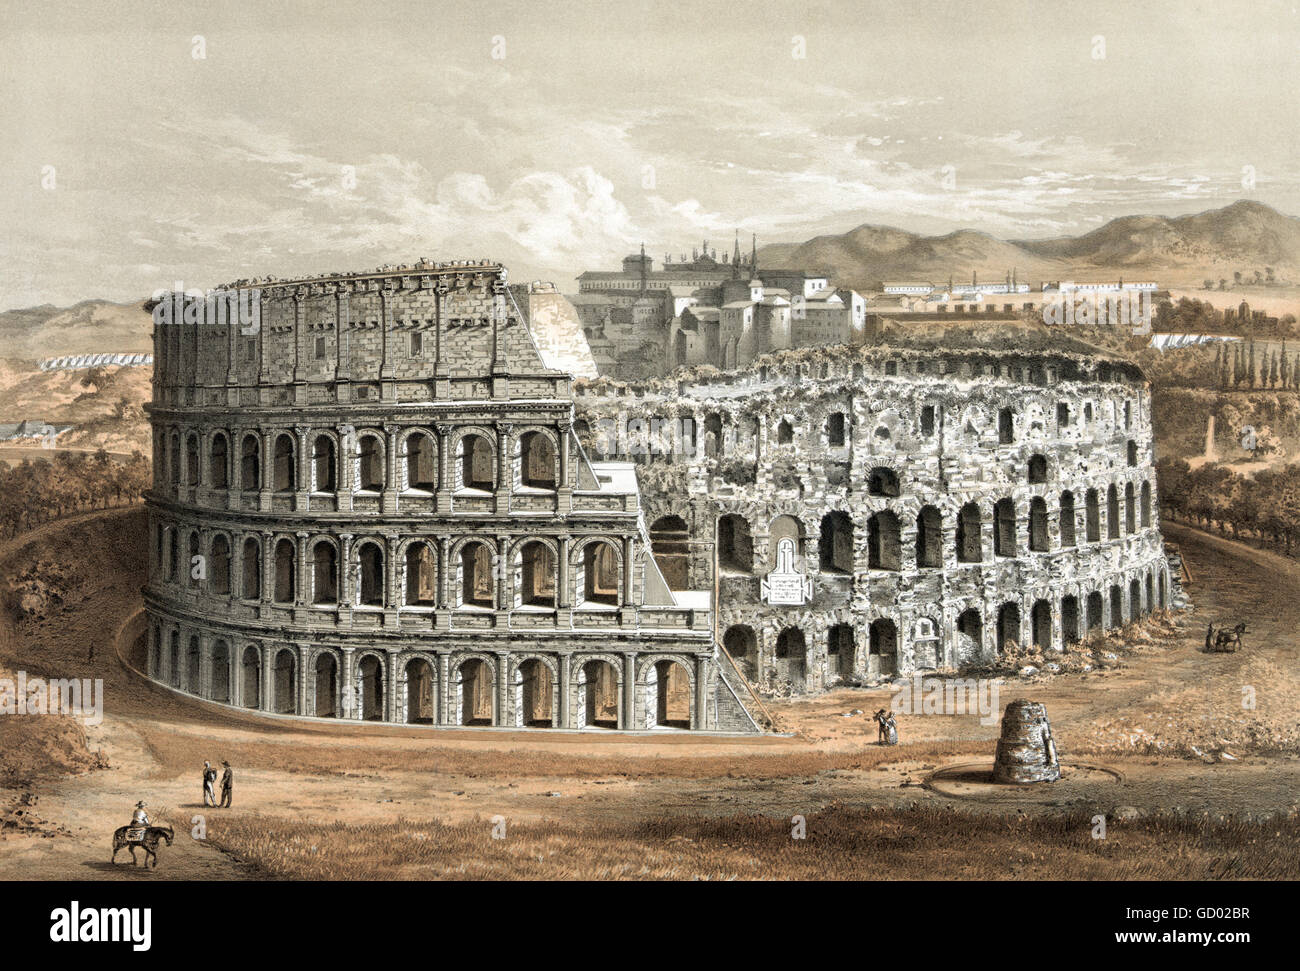 Colossseum in Rome.19th century illustration showing 'original structure and deteriorated state'. Lithograph published by A O Crane and Co in 1872. Stock Photo